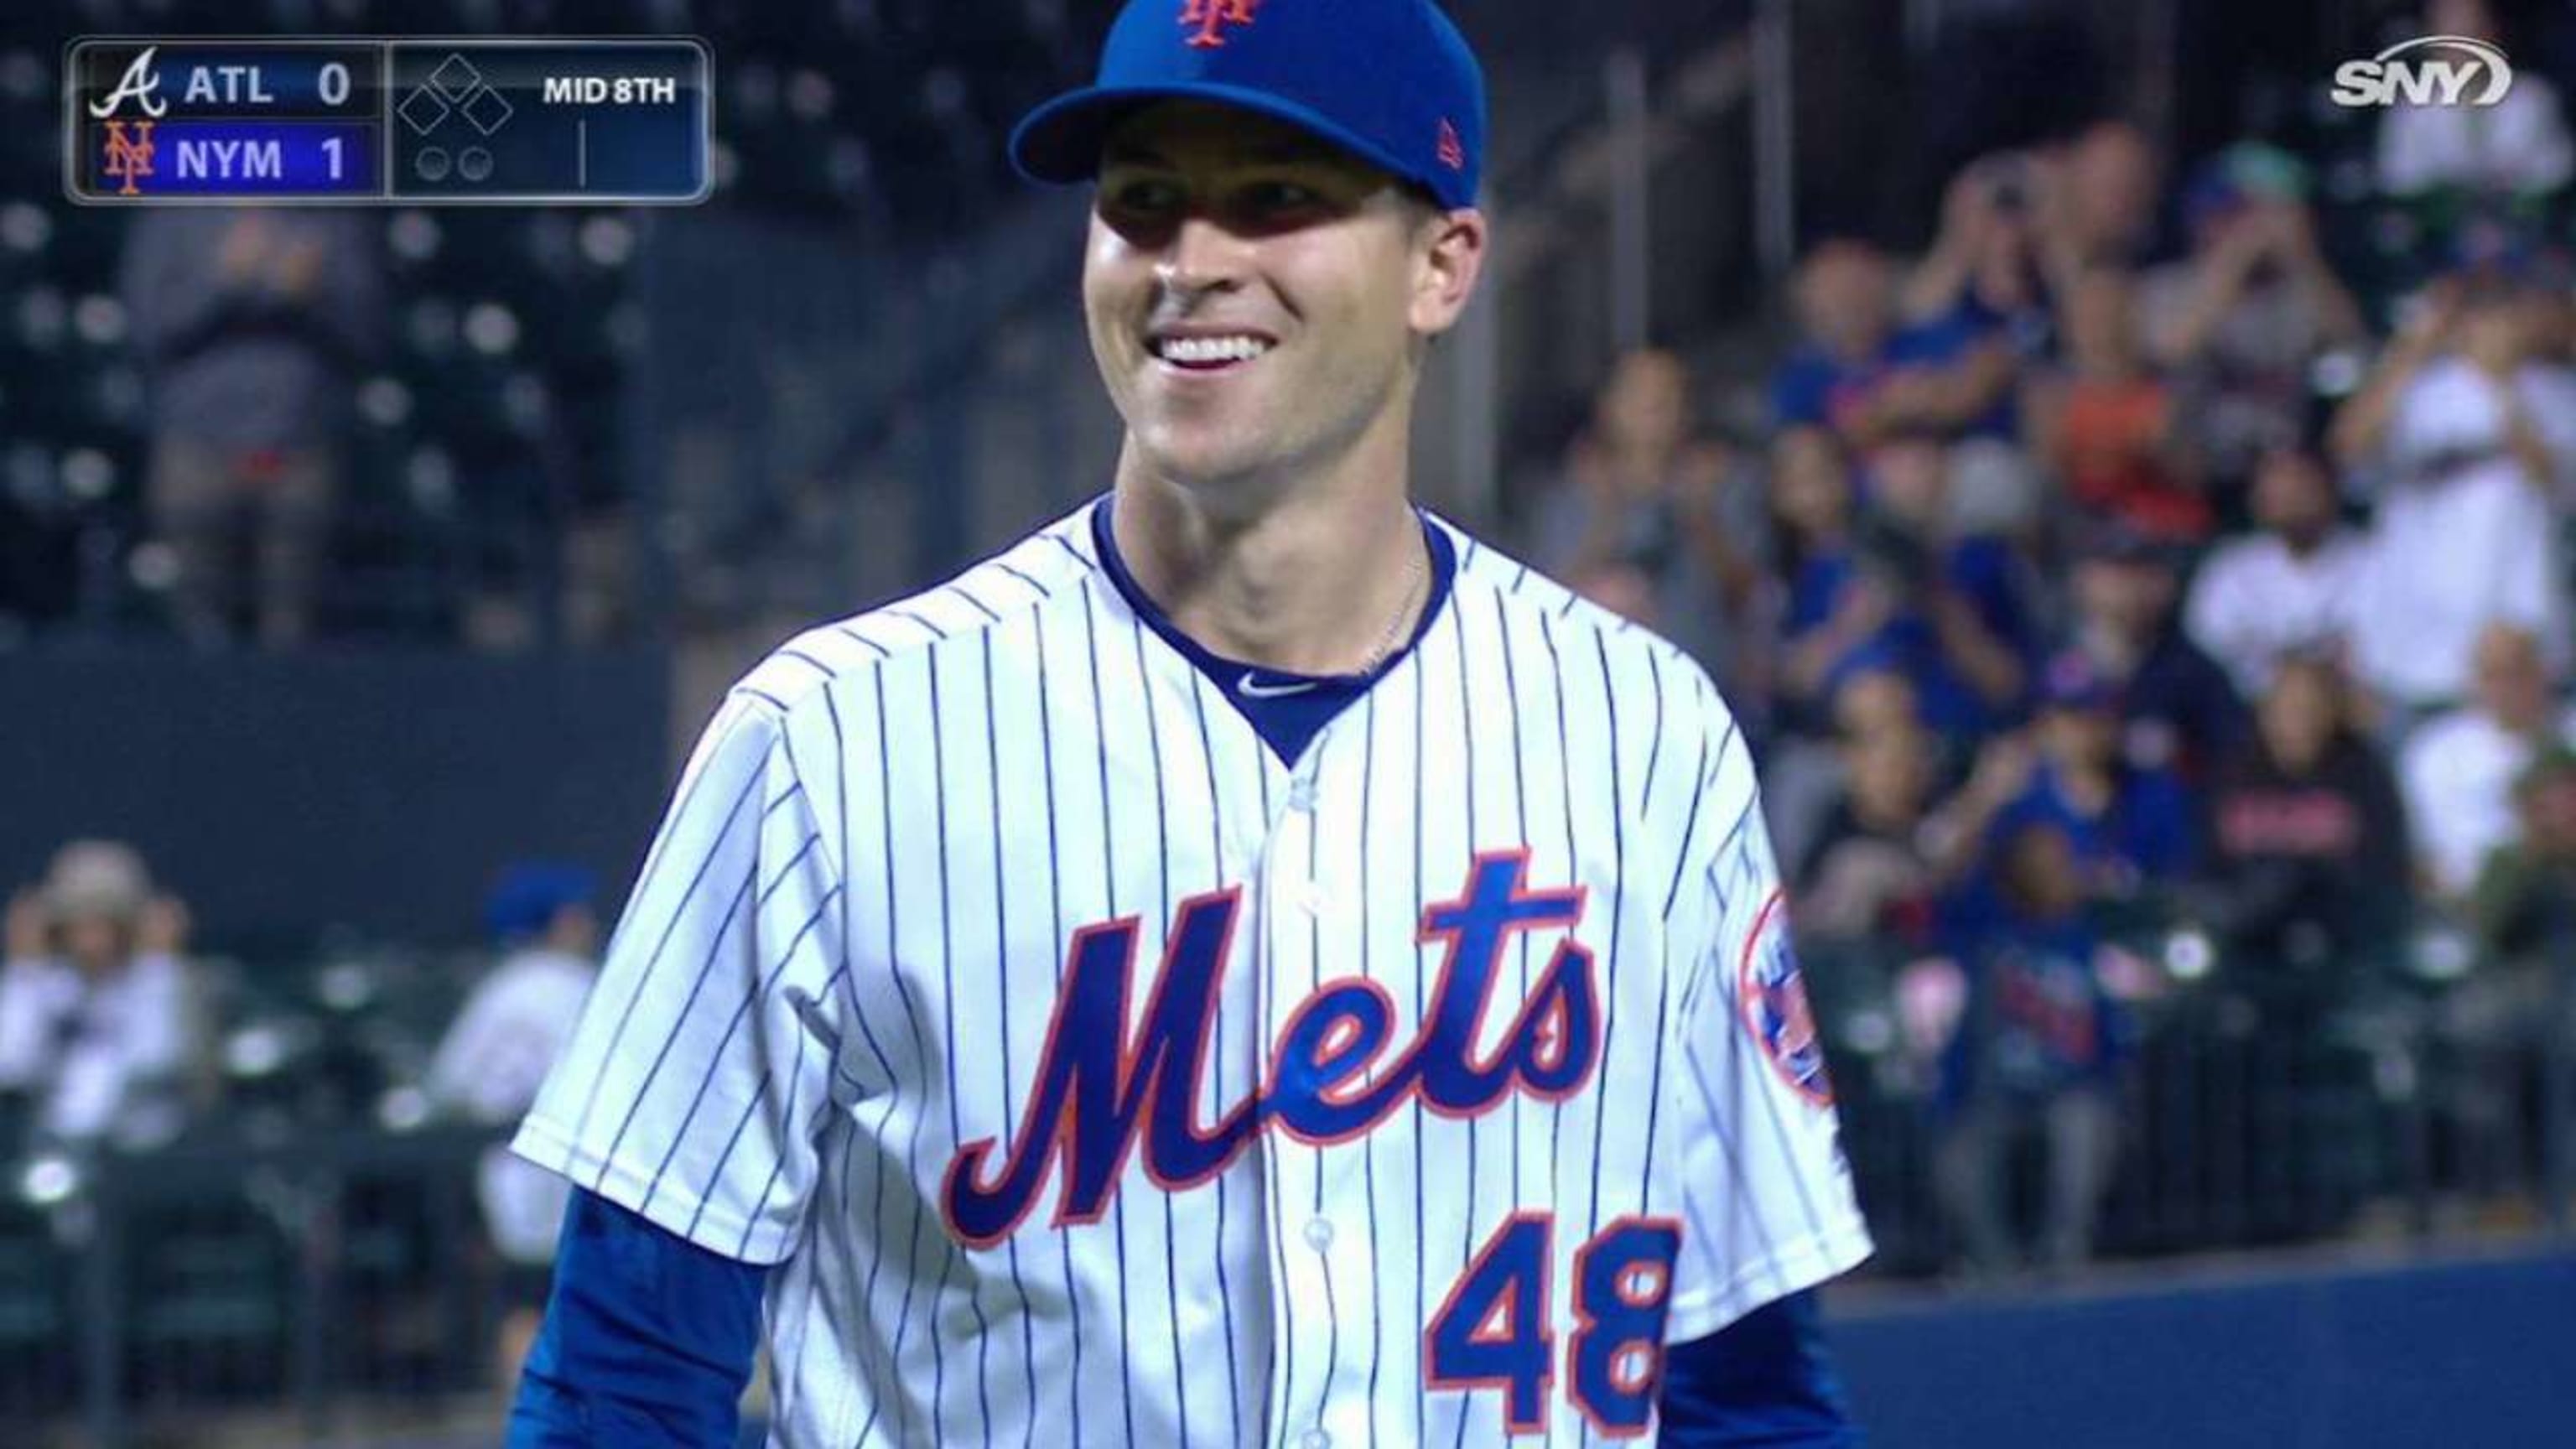 Jacob deGrom gets 1,000th career strikeout